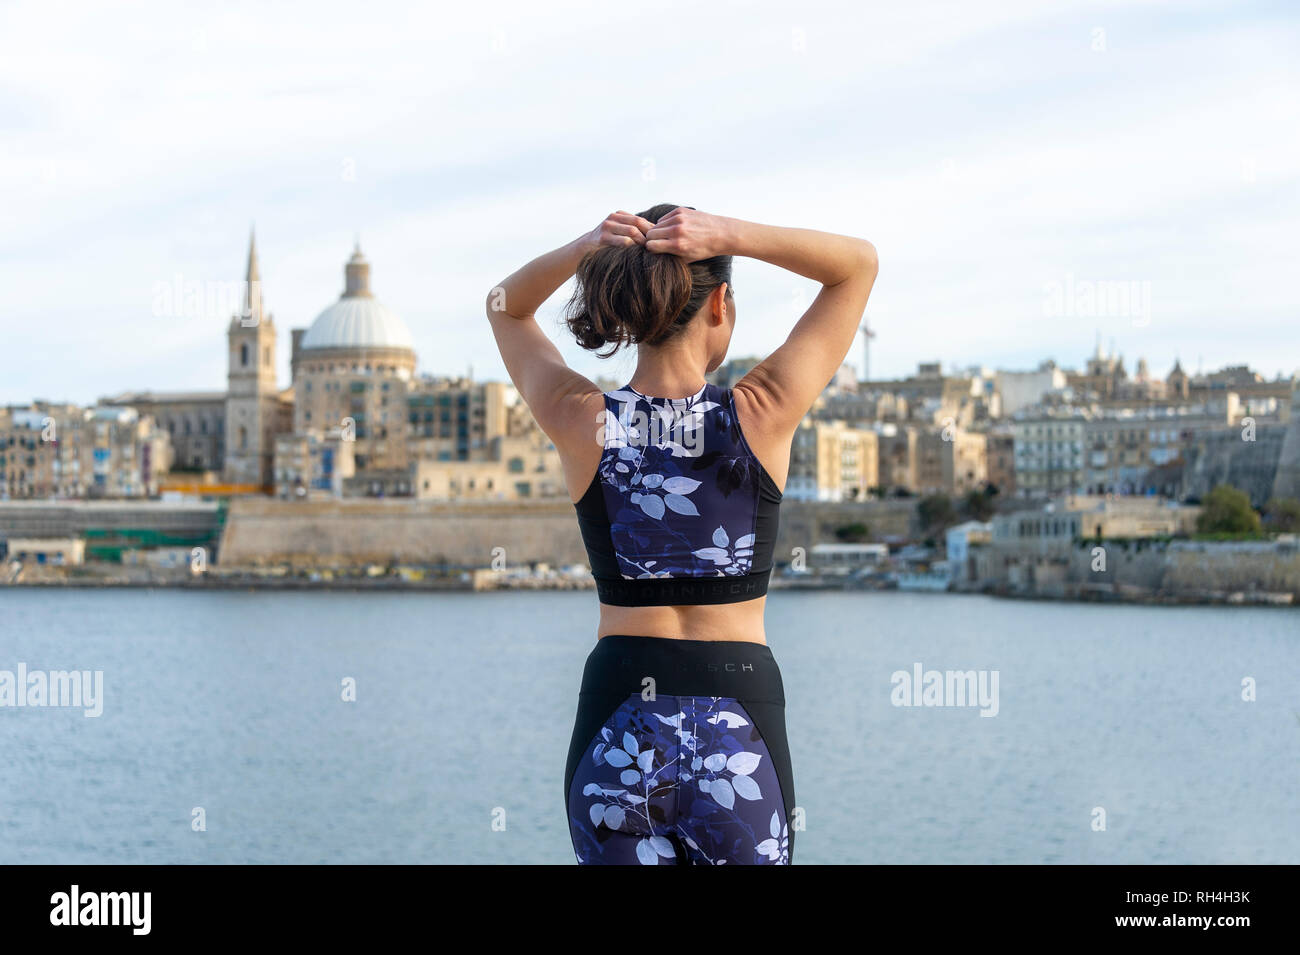 back view of a woman adjusting her hair before exercising outside. Valletta Malta background. Stock Photo